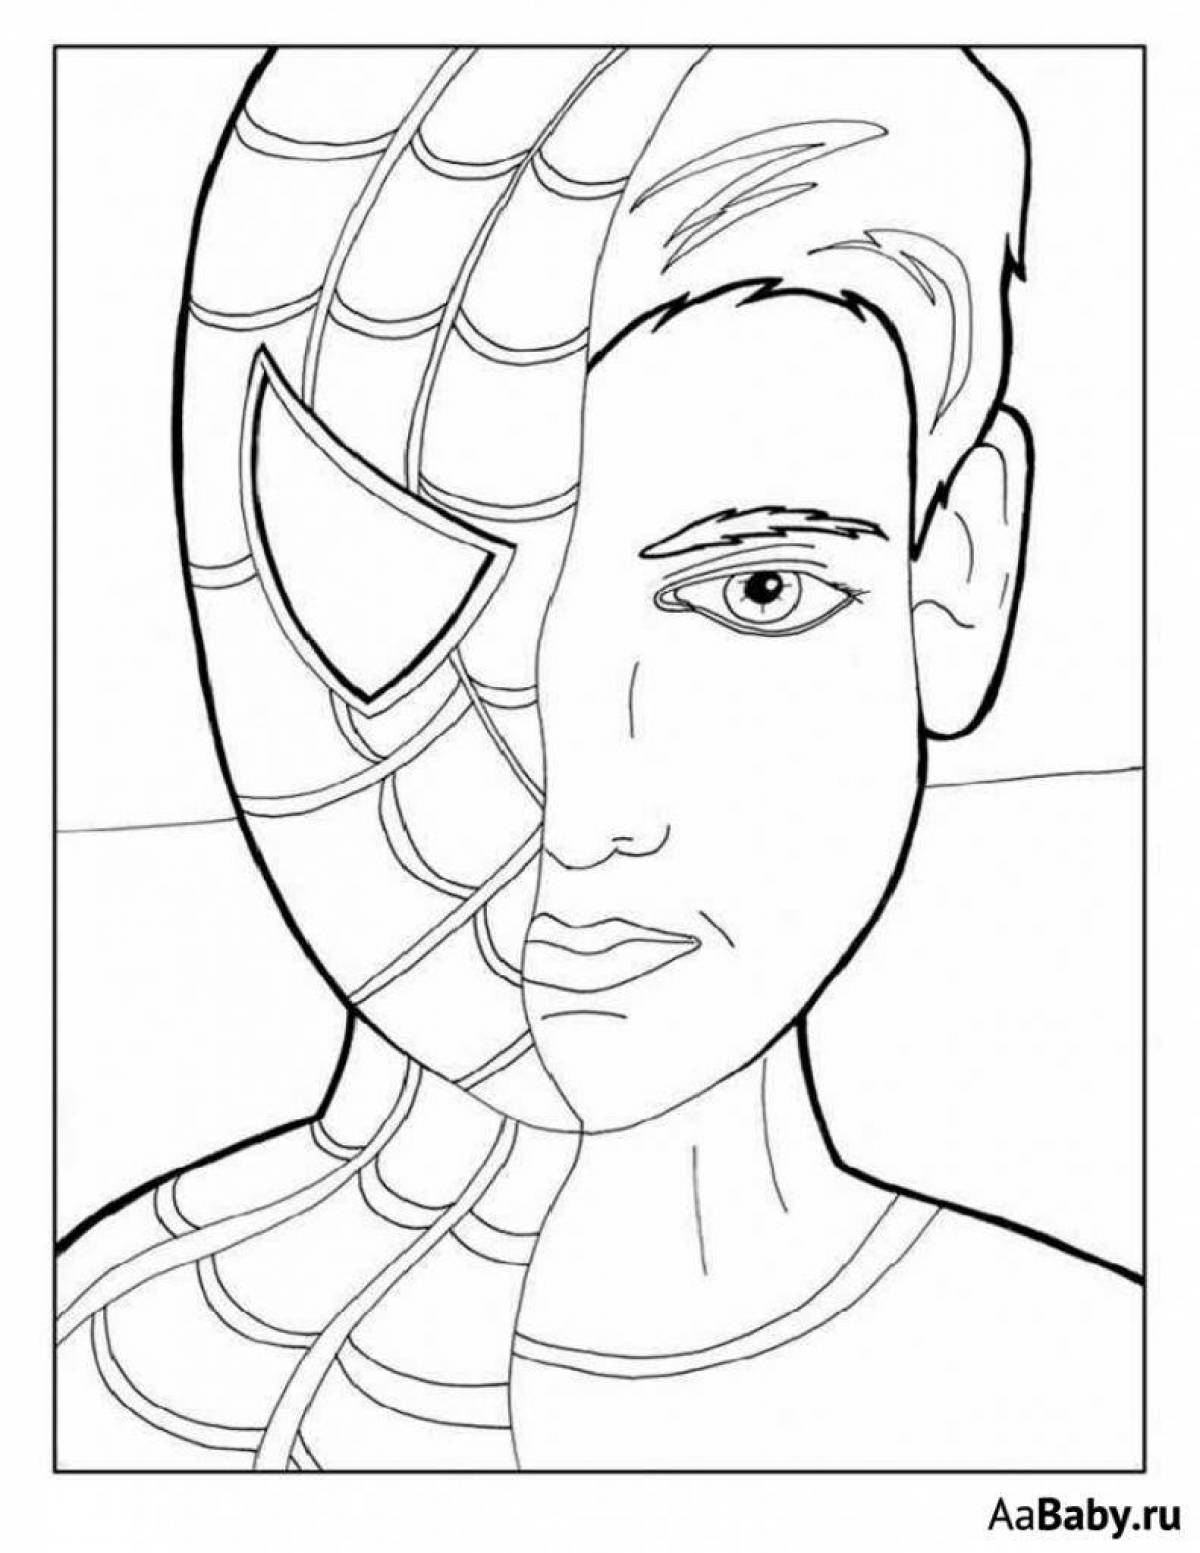 Spiderman's happy face coloring page